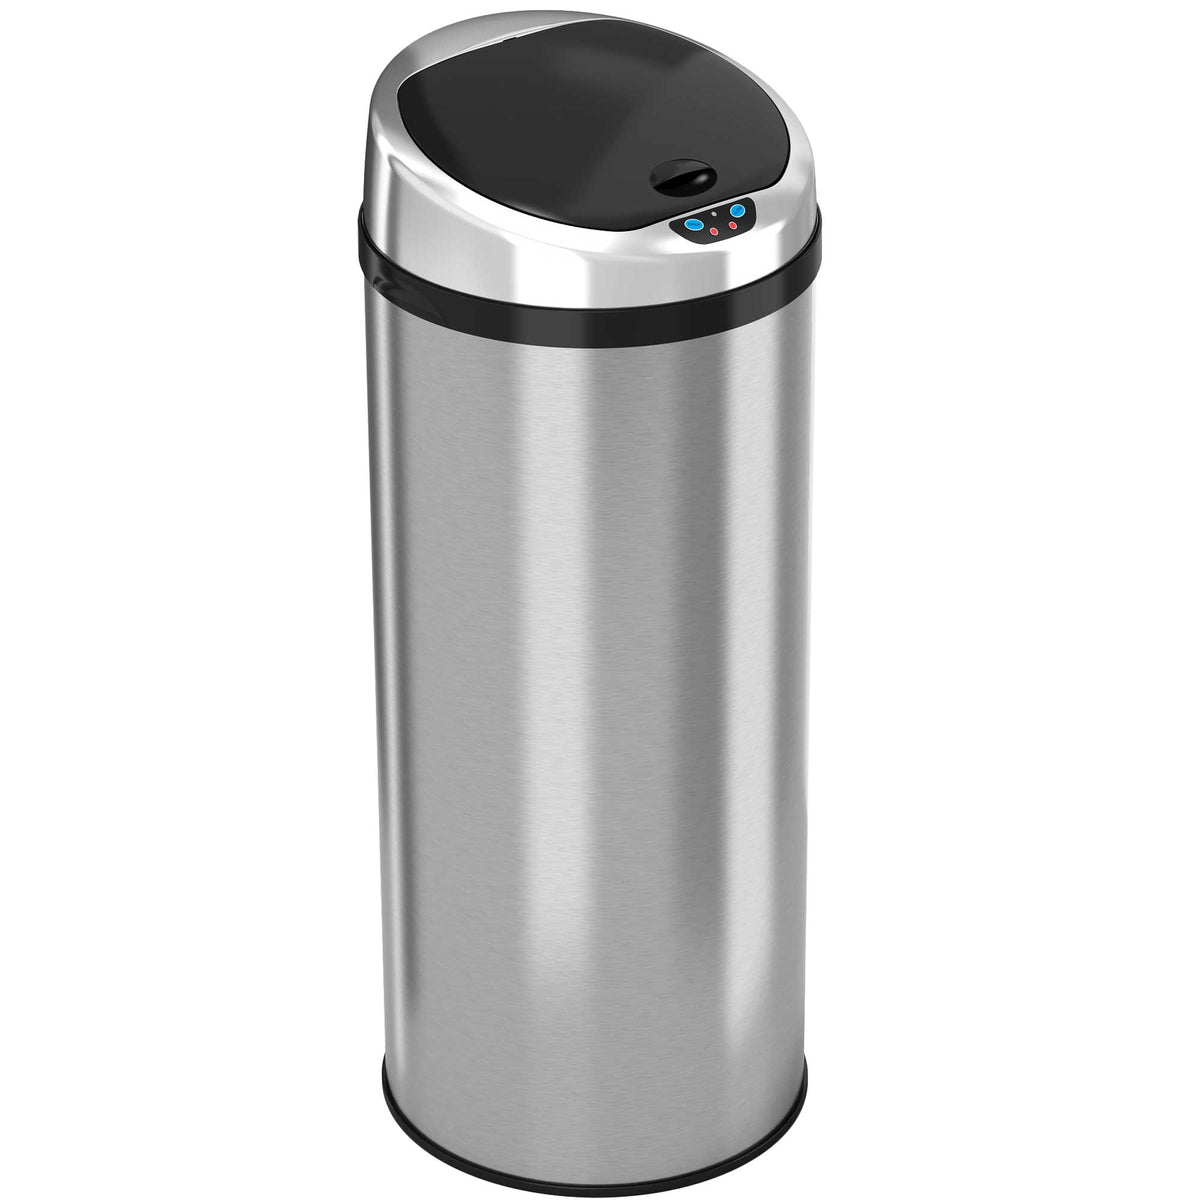 iTouchless 13 Gallon Stainless Steel Sensor Trash Can with Odor Filter